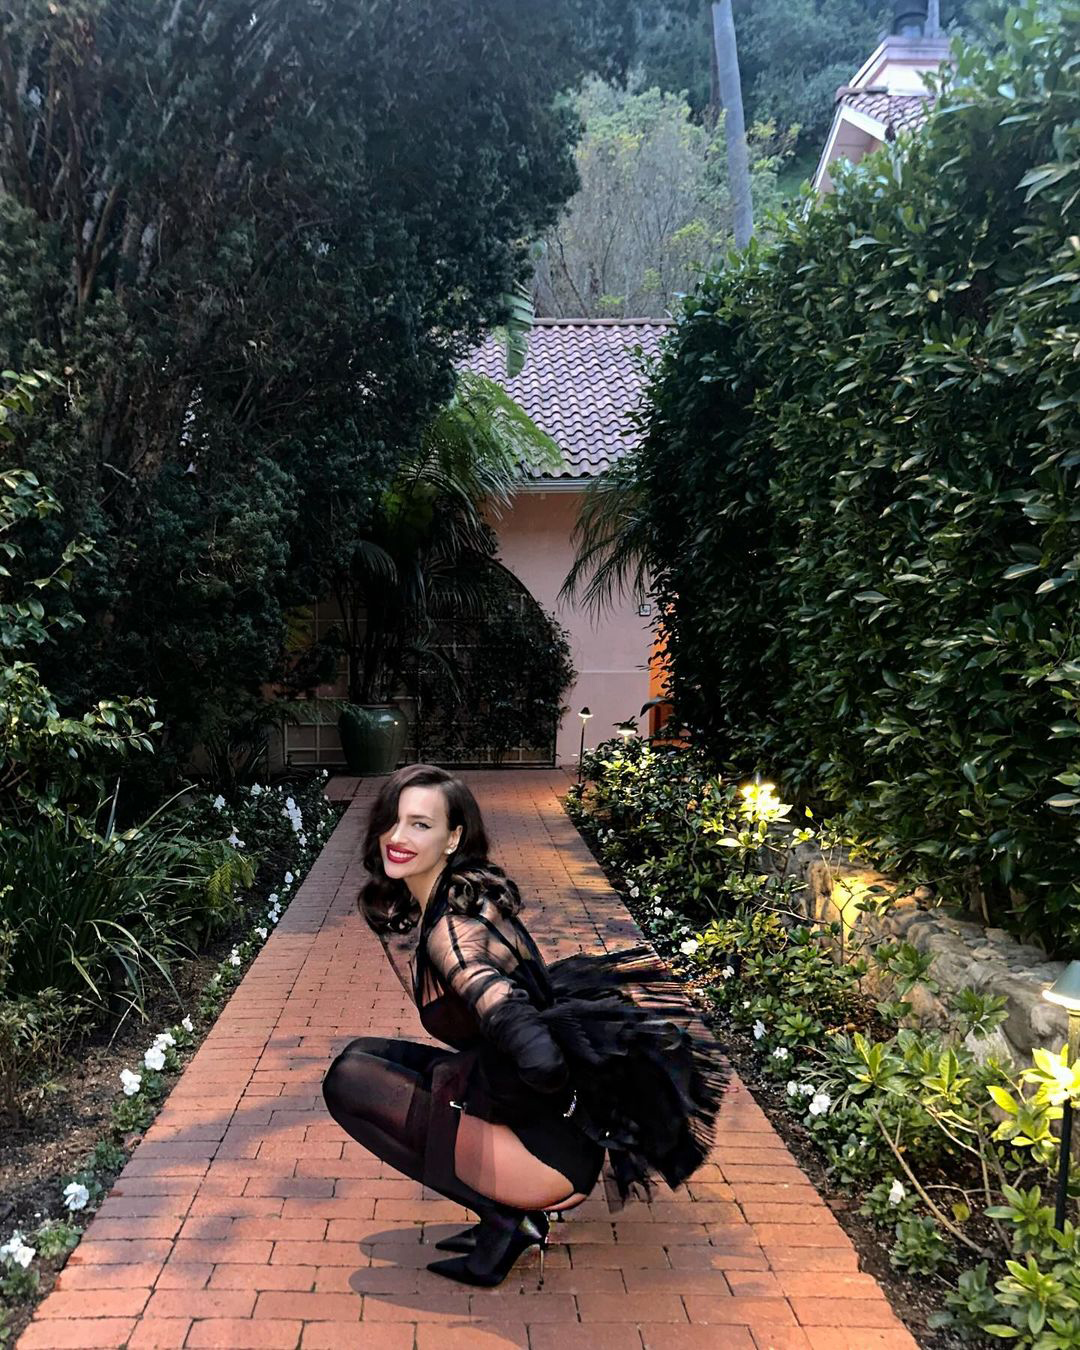 Shayk showed off her physique while wearing an all-black outfit which included stockings